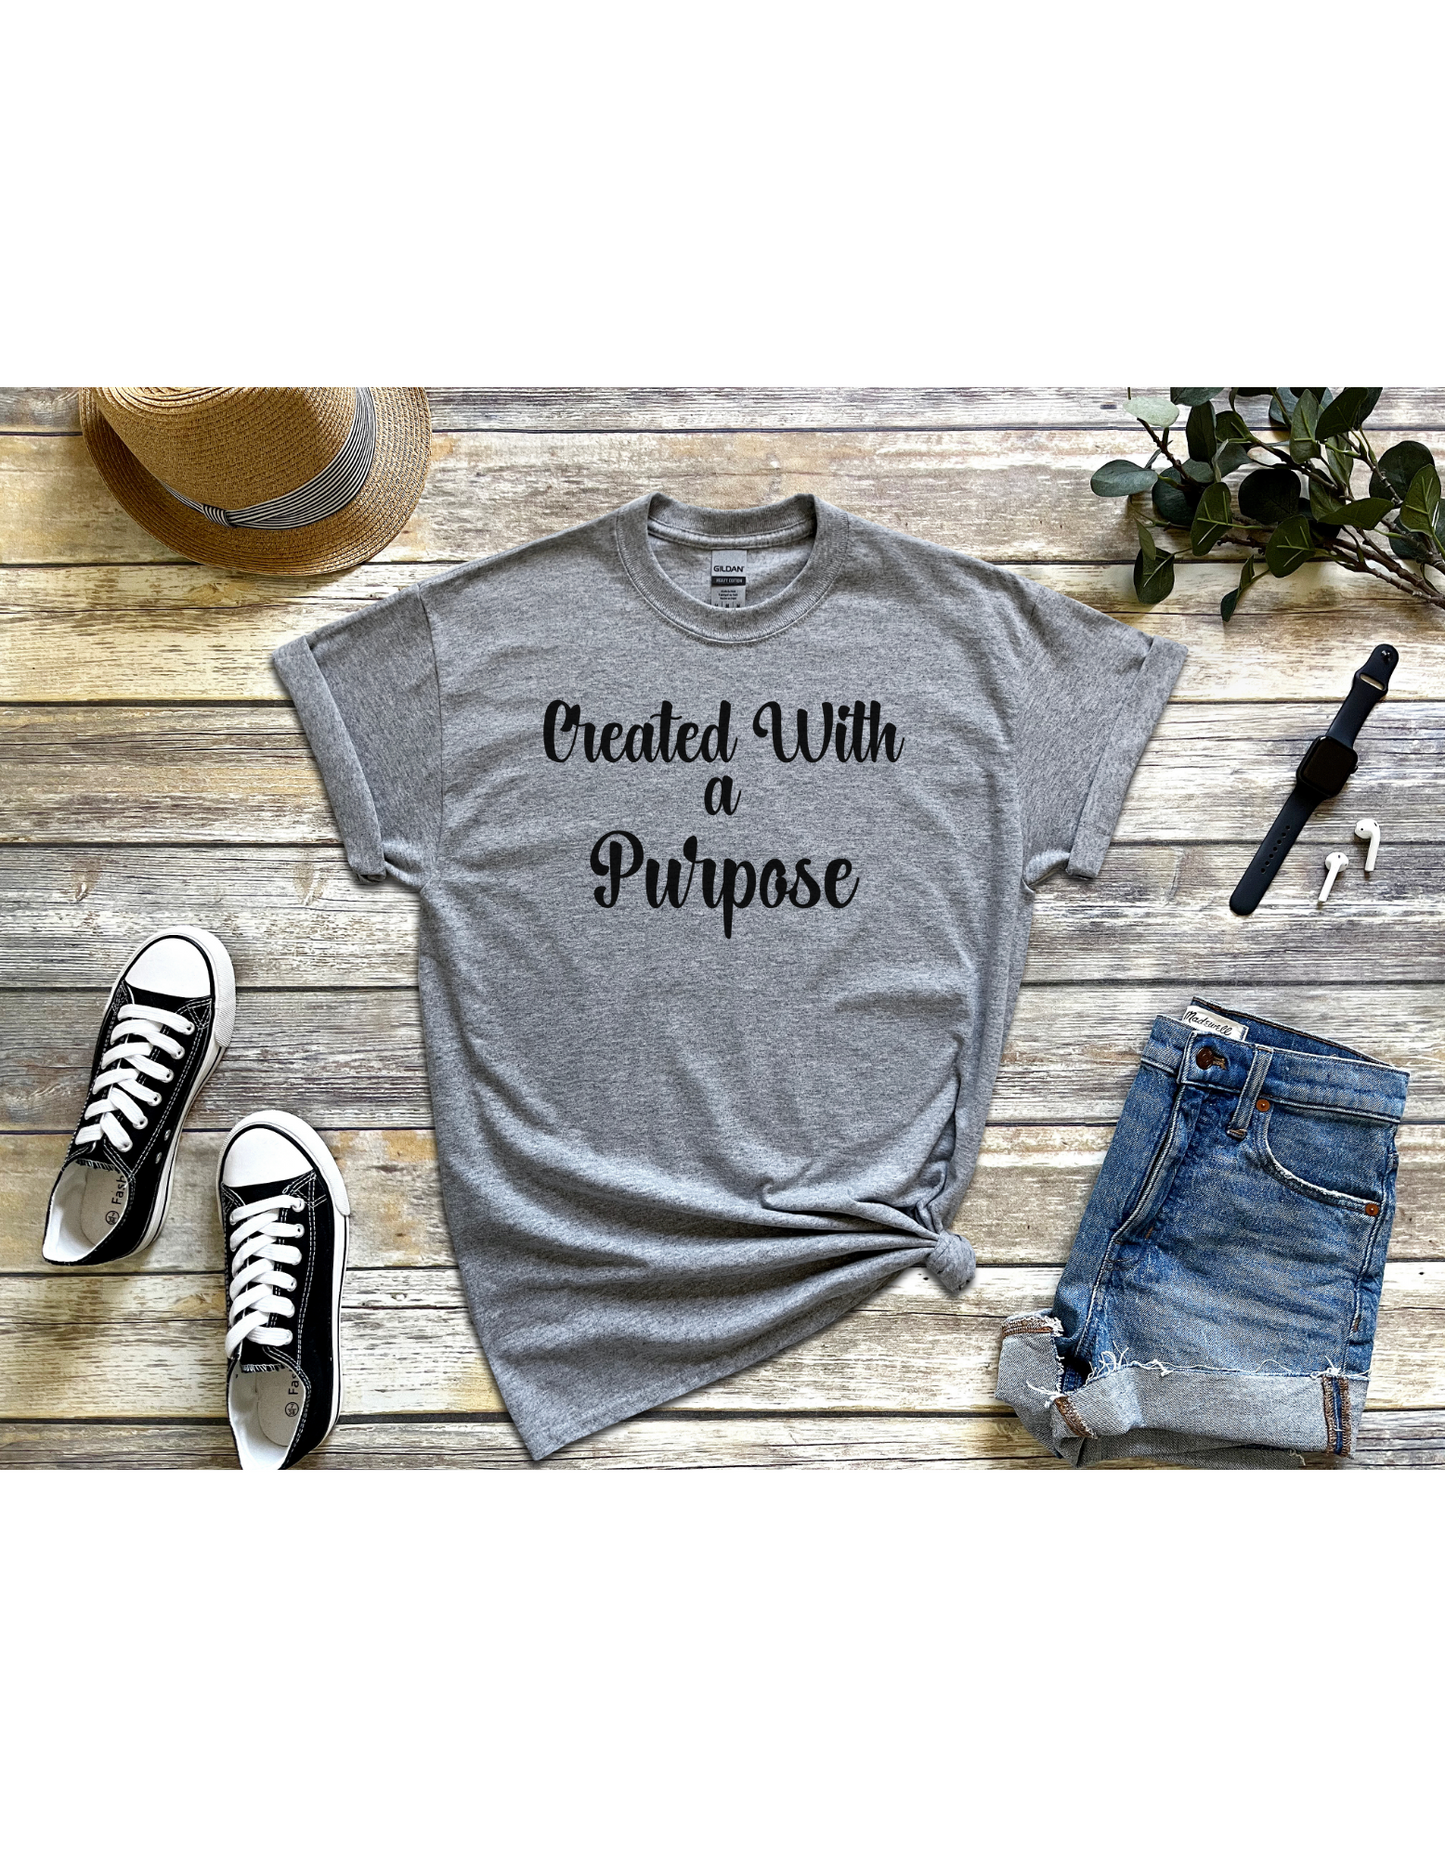 Created With A Purpose Shirt, Christian T-Shirt, Religious Tee